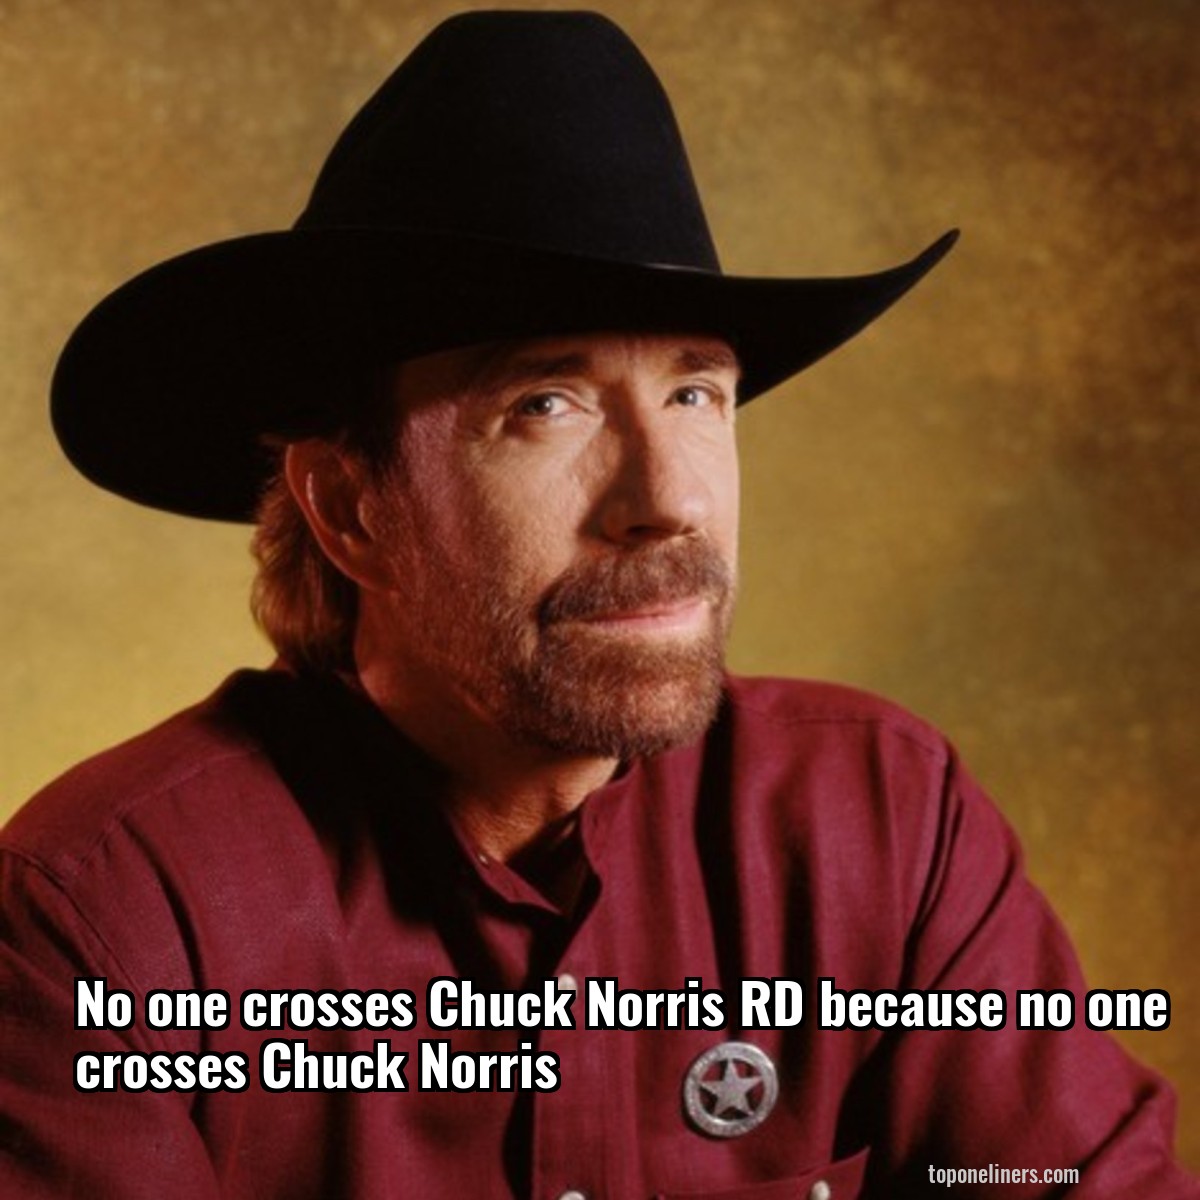 No one crosses Chuck Norris RD because no one crosses Chuck Norris